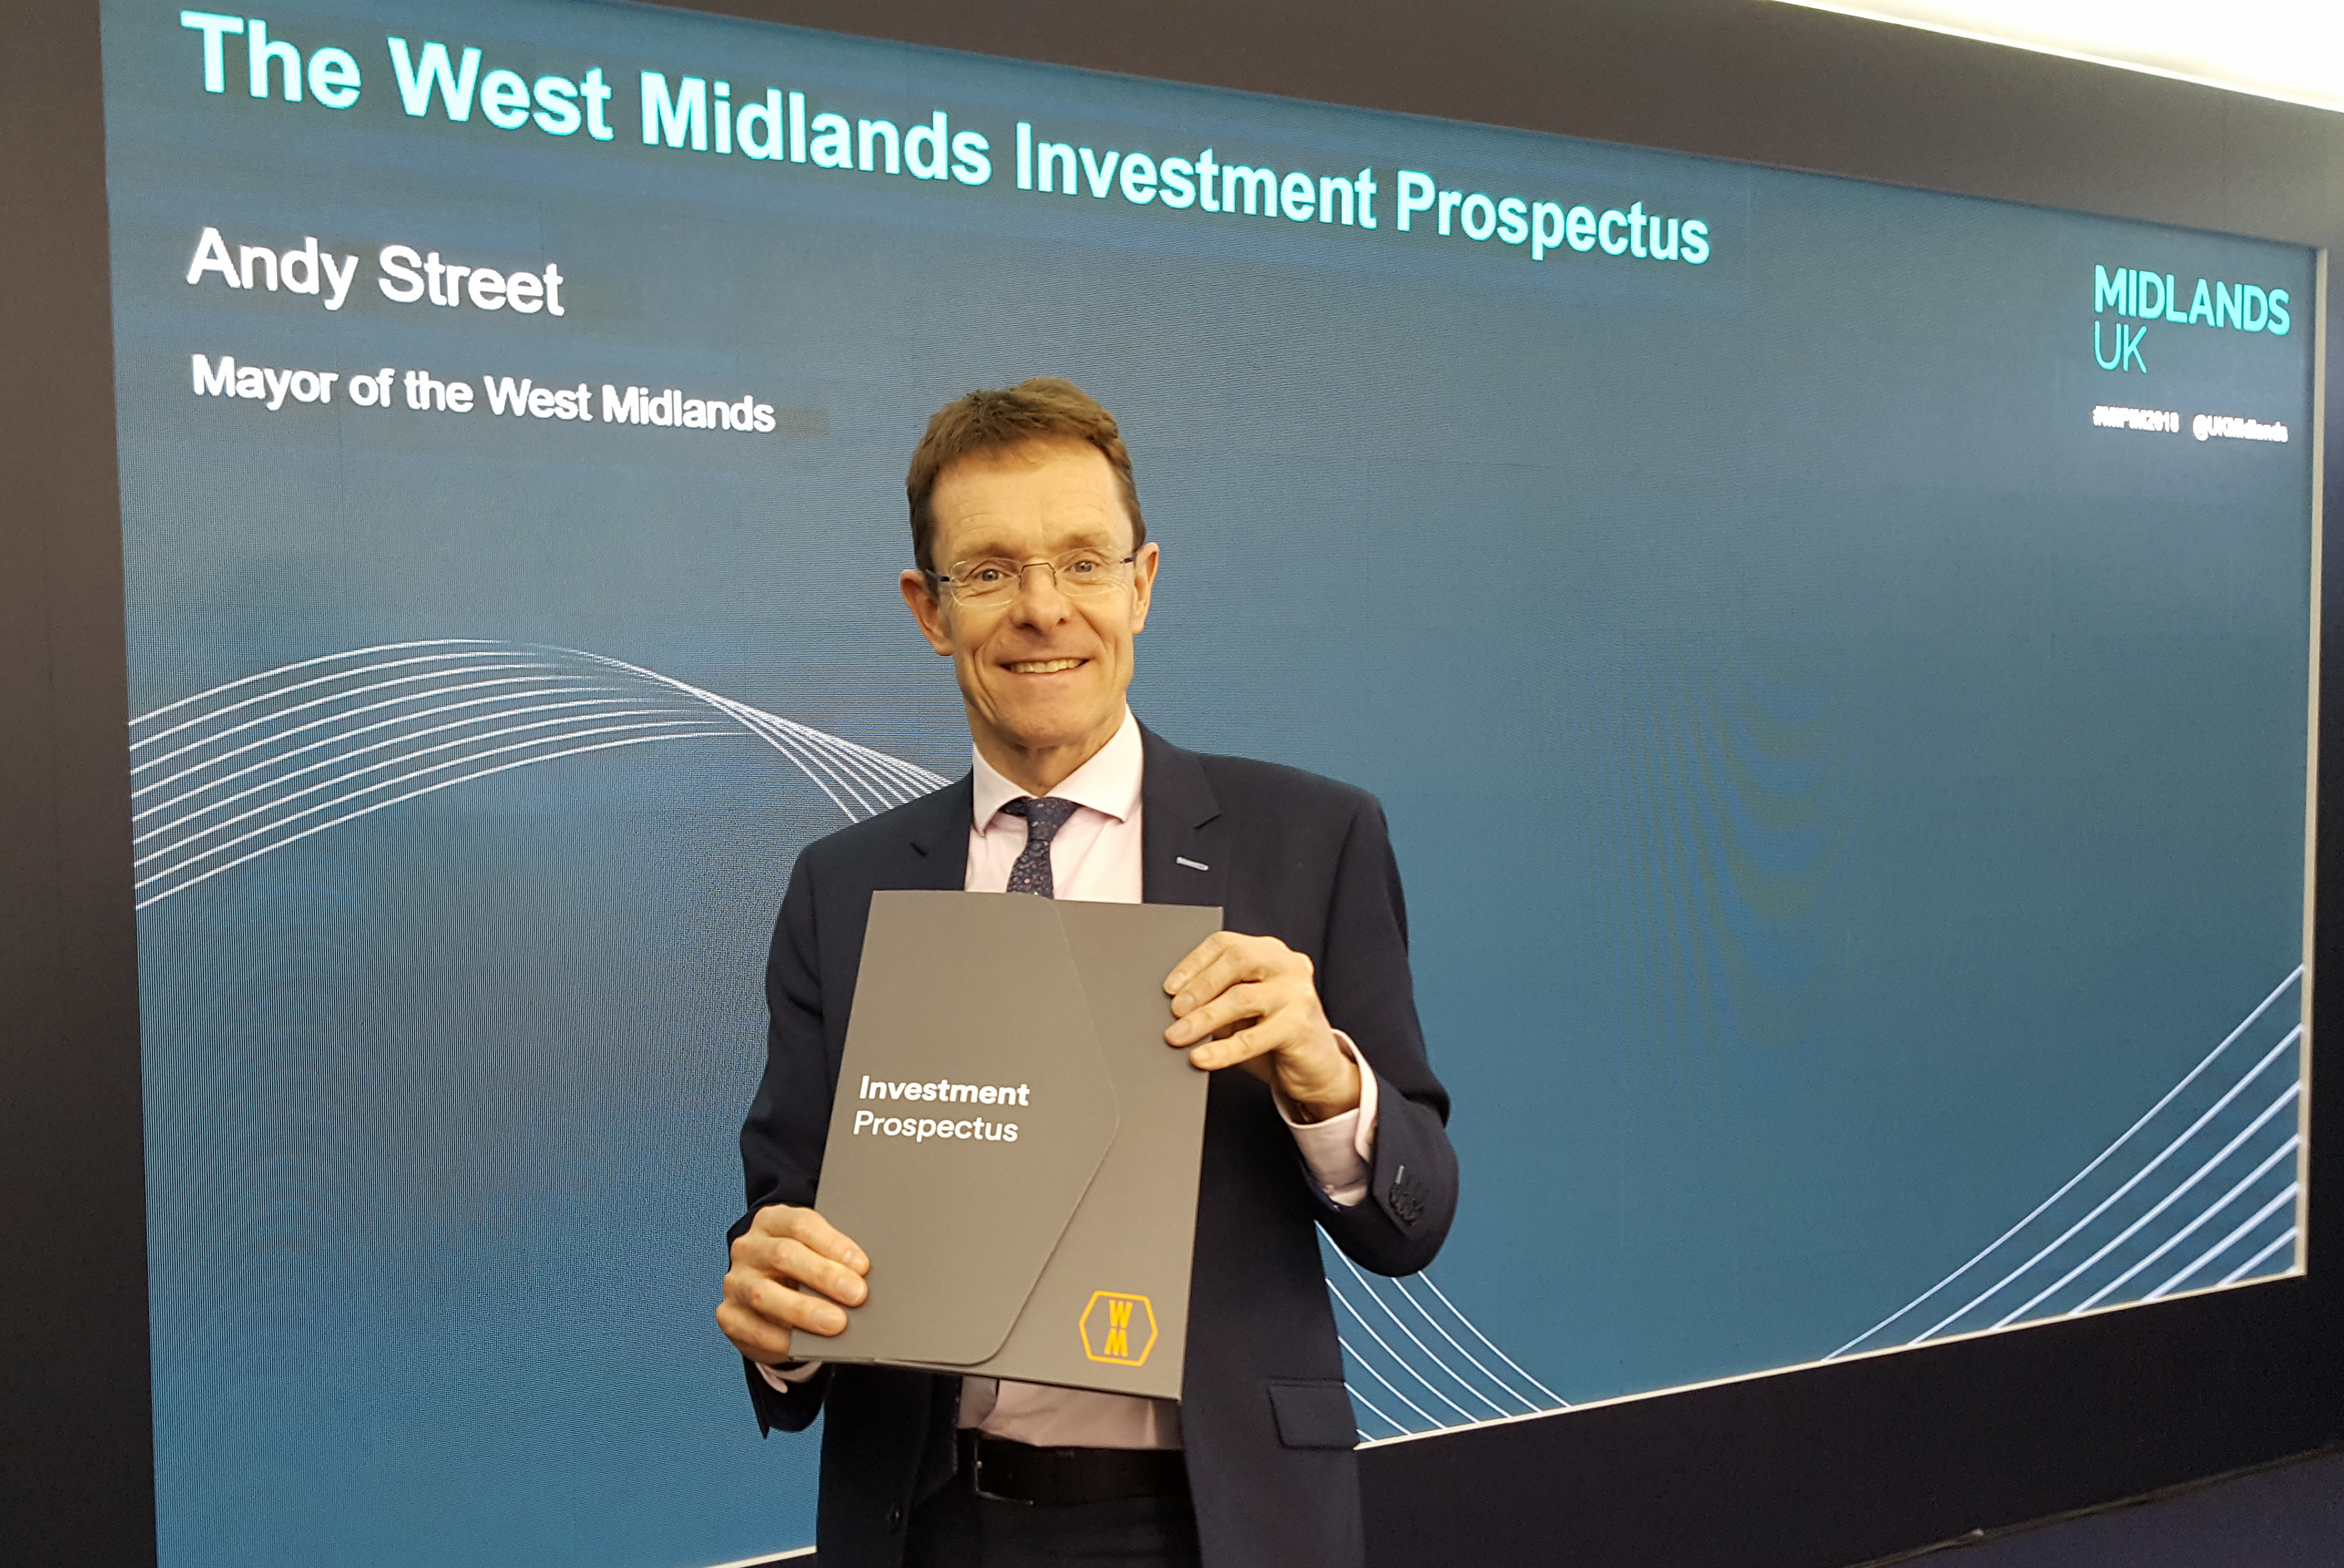 Mayor of the West Midlands Andy Street launches the region's Investment Prospectus at MIPIM 2018